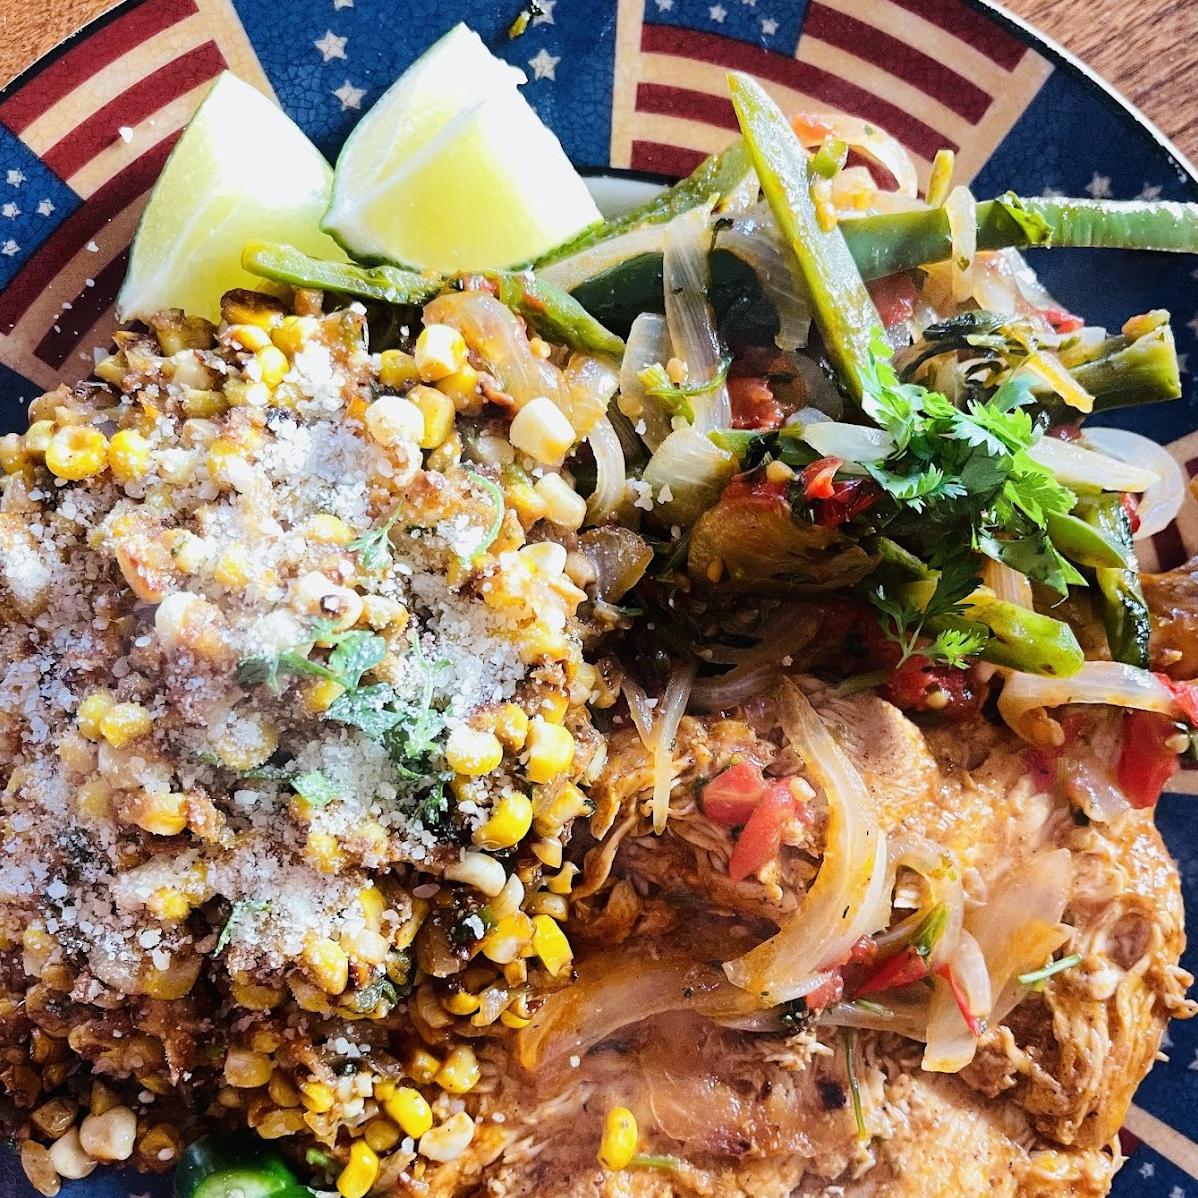  Try this Mexican-inspired dish for your next party.